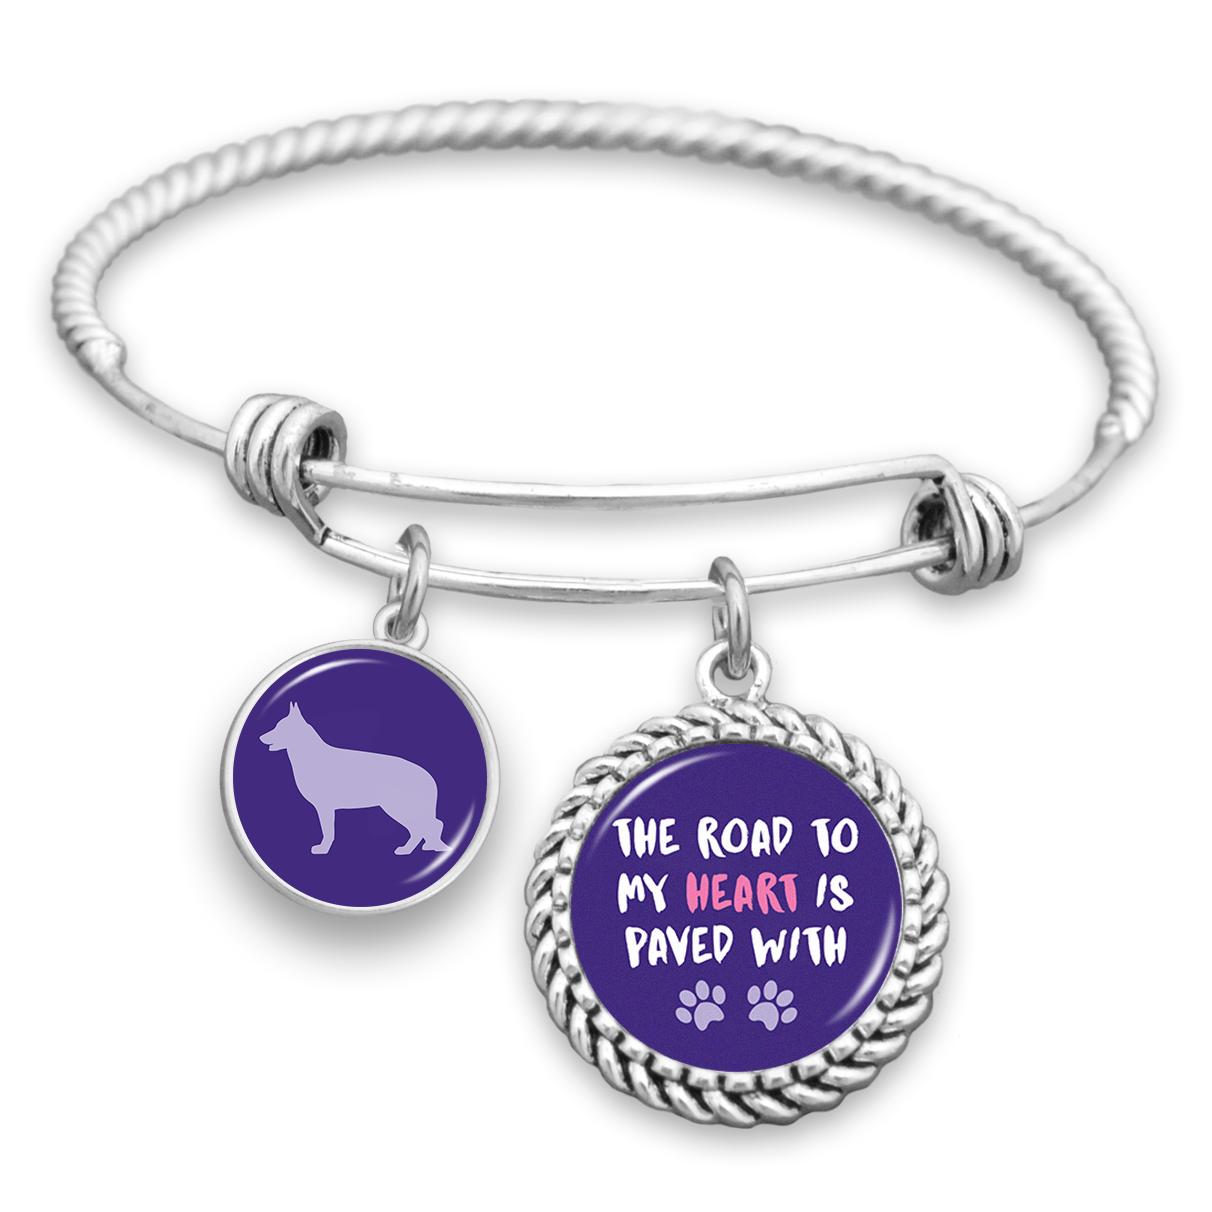 German Shepherd The Road To My Heart Is Paved With Paws Charm Bracelet